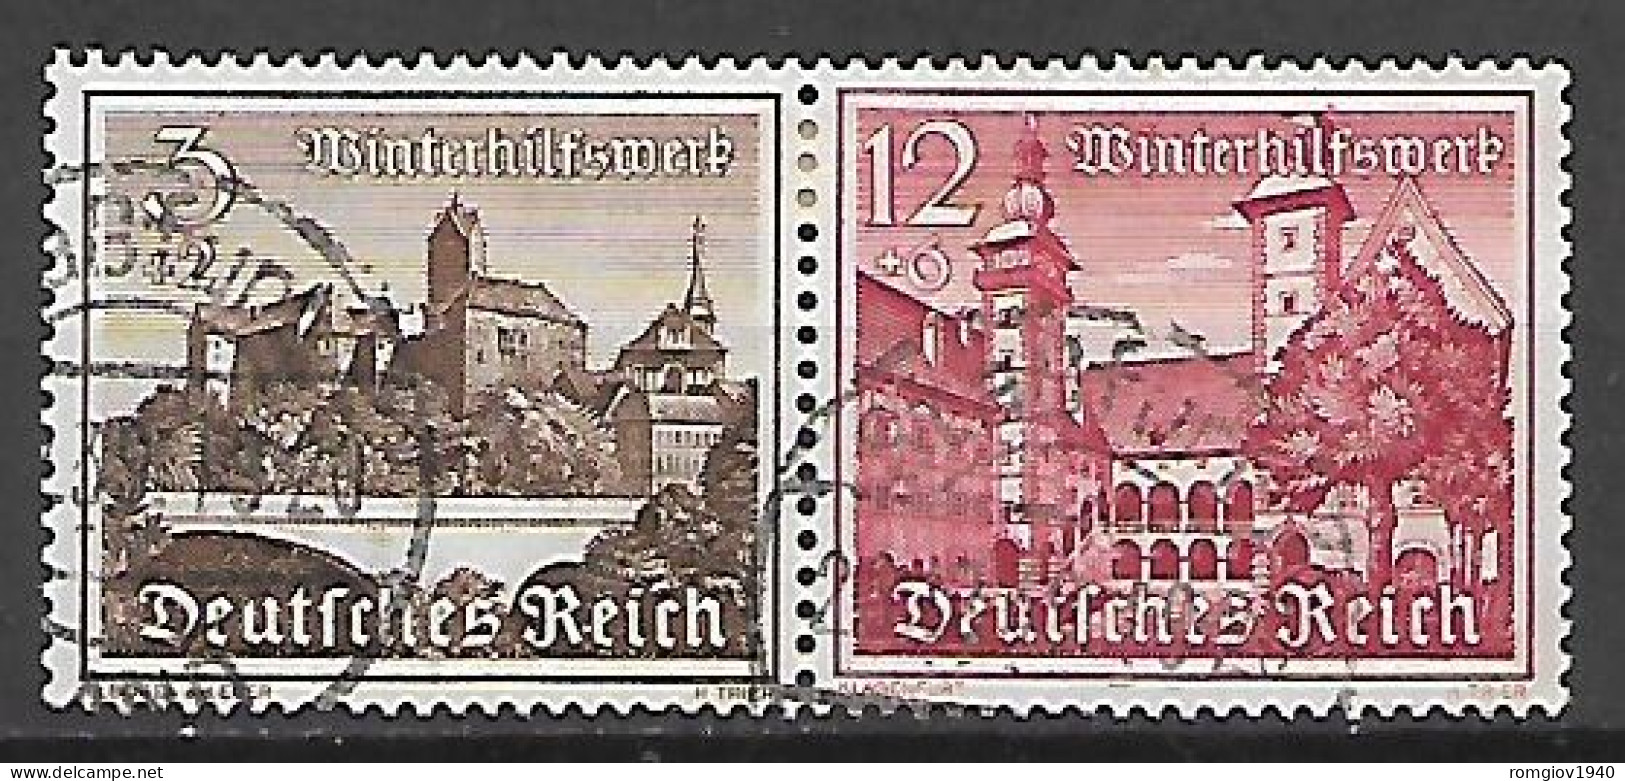 GERMANIA REICH TERZO REICH 1939 TETE.BECH   SOCCORSO INVERNALE YVERT. 654a  USATA VF - Used Stamps